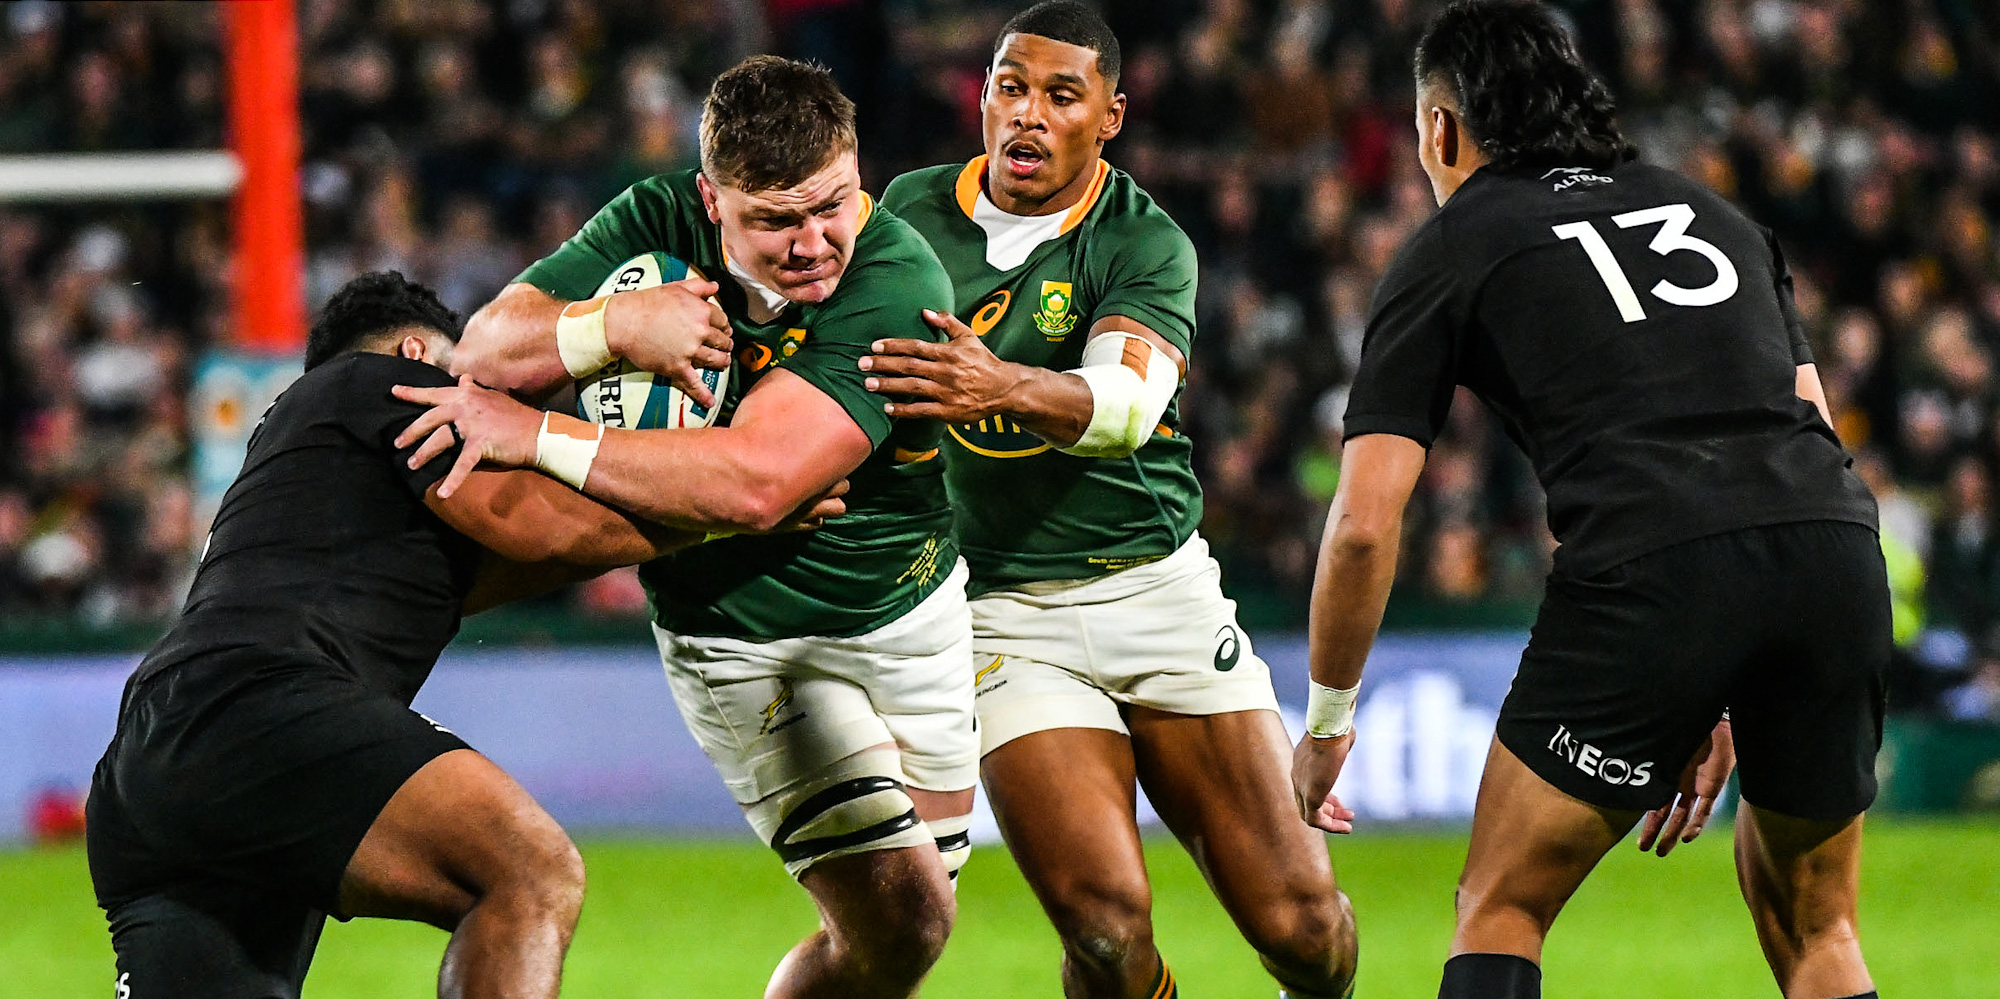 Jasper Wiese on the charge against NZ, with Damian Willemse in support.